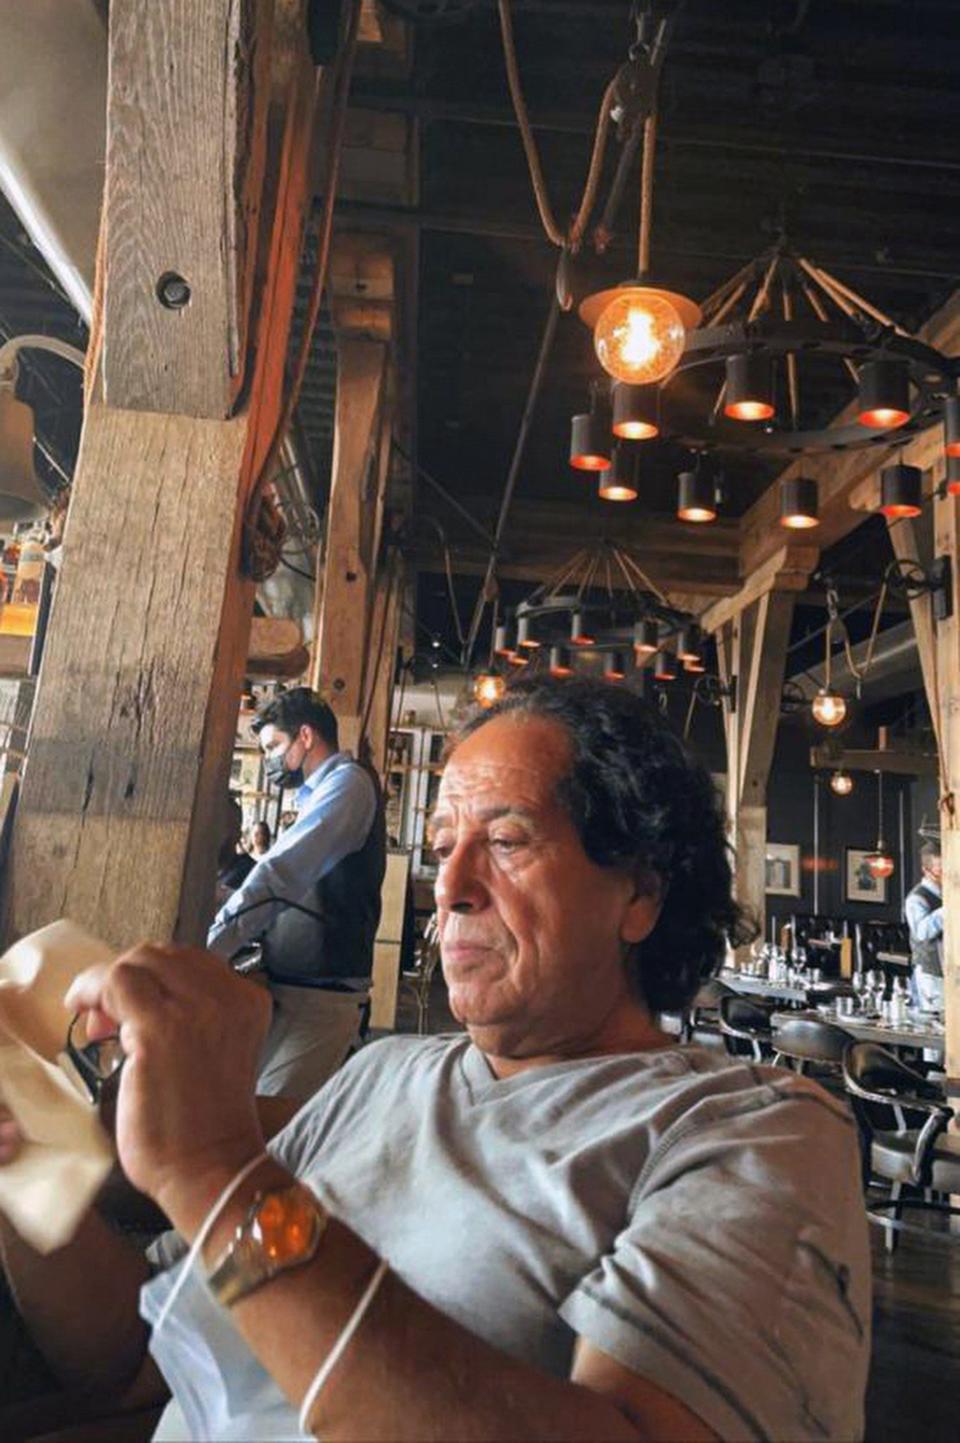 In this photo provided by Ibrahim Almadi, Saad Ibrahim Almadi sits in a restaurant in an unidentified place in the United States in August 2021. Almadi, 72, who is a citizen of both Saudi Arabia and the U.S., was arrested in Saudi Arabia last November and was recently sentenced to 16 years in prison over tweets critical of the Saudi government. (Ibrahim Almadi via AP)